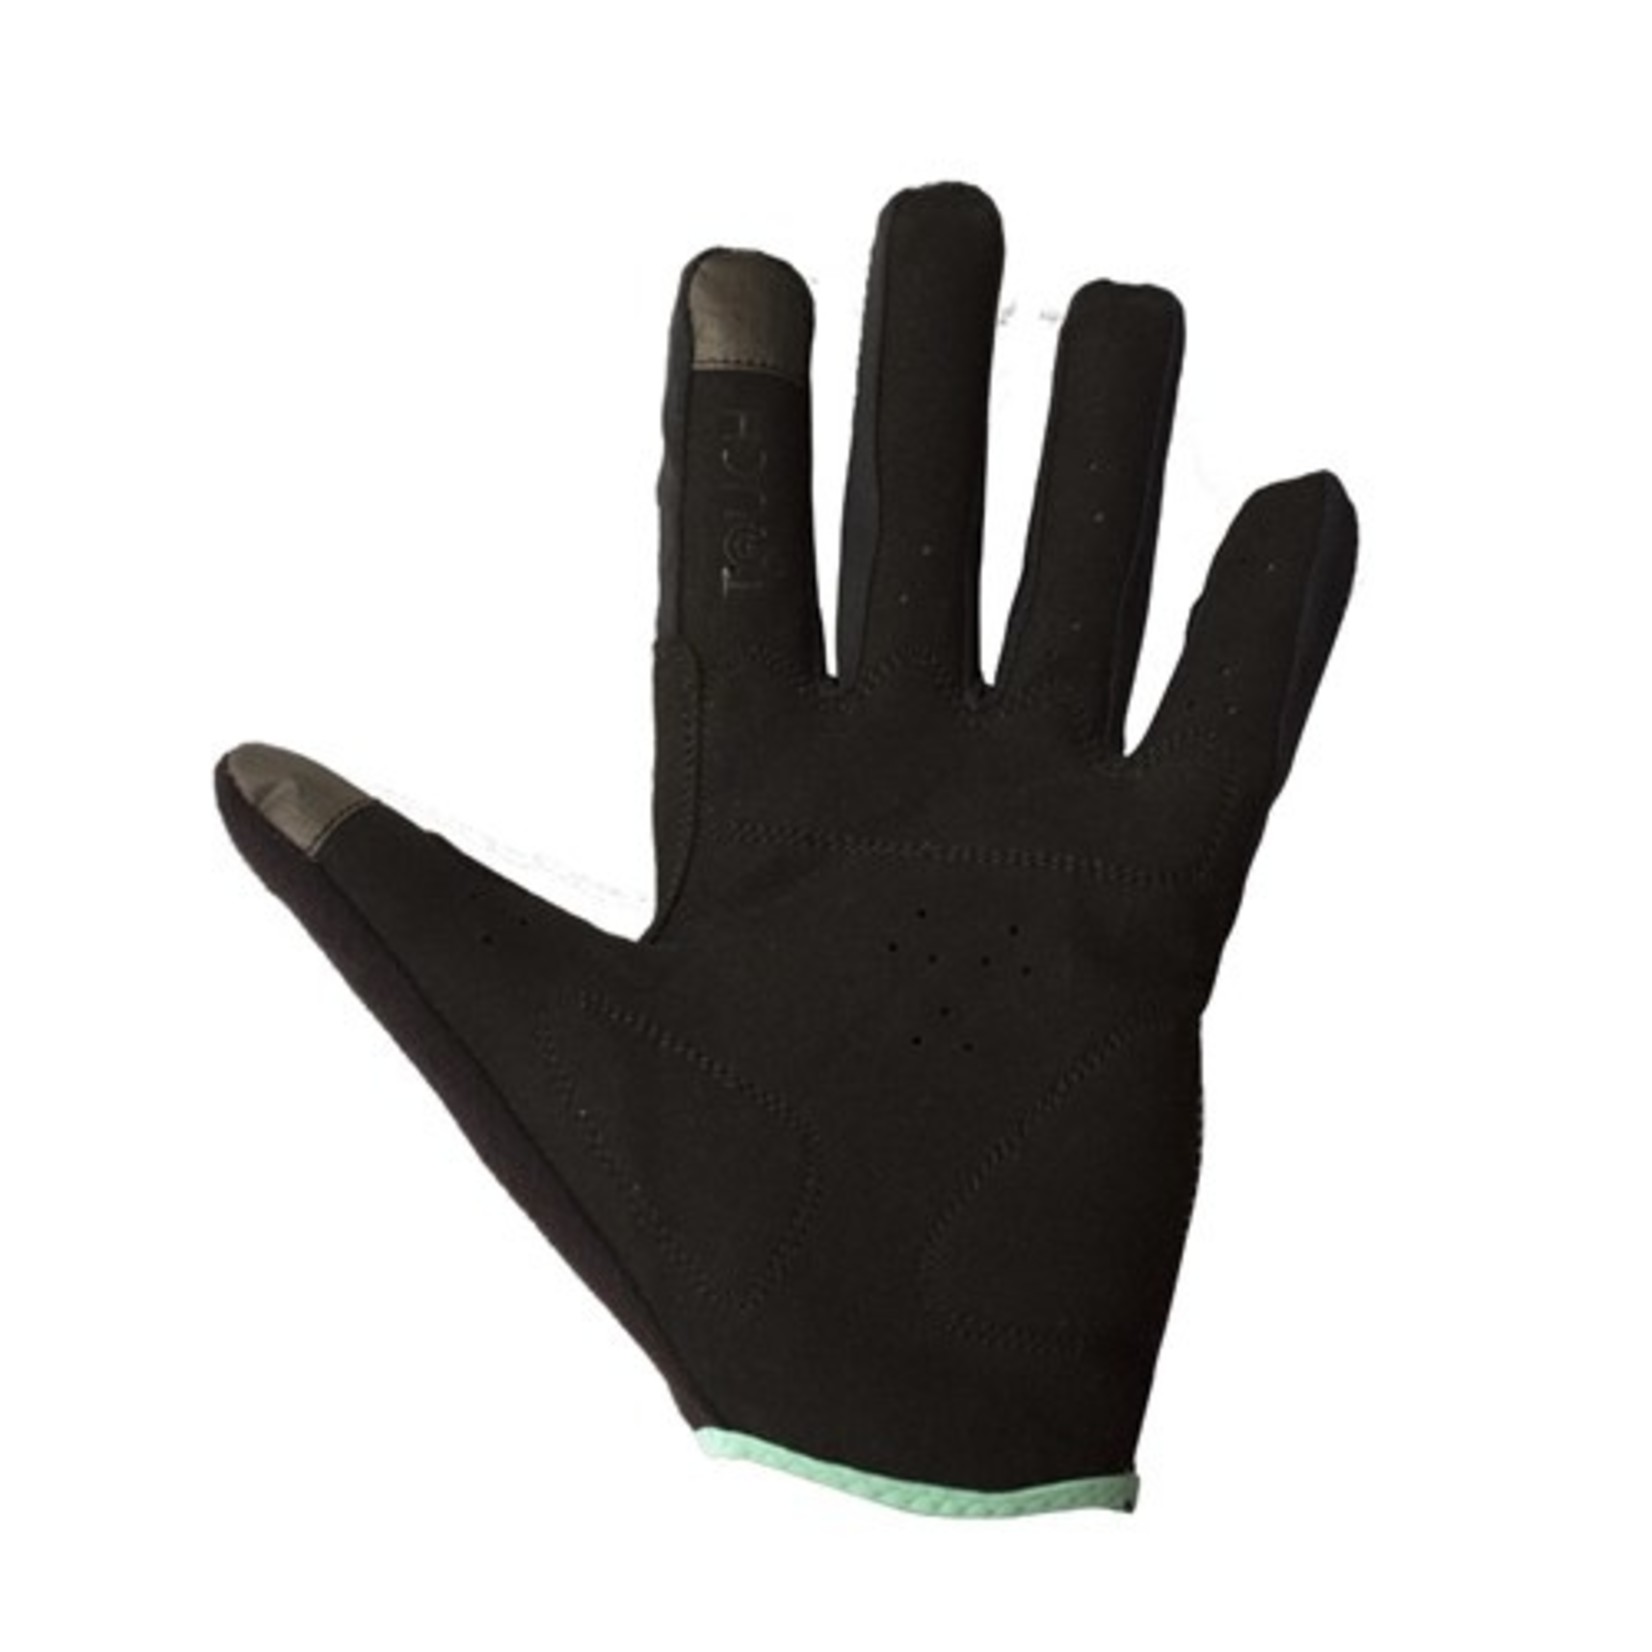 Azur Azur Bike/Cycling Lightweight Gloves - L60 Series - Breathable - Mint - Small